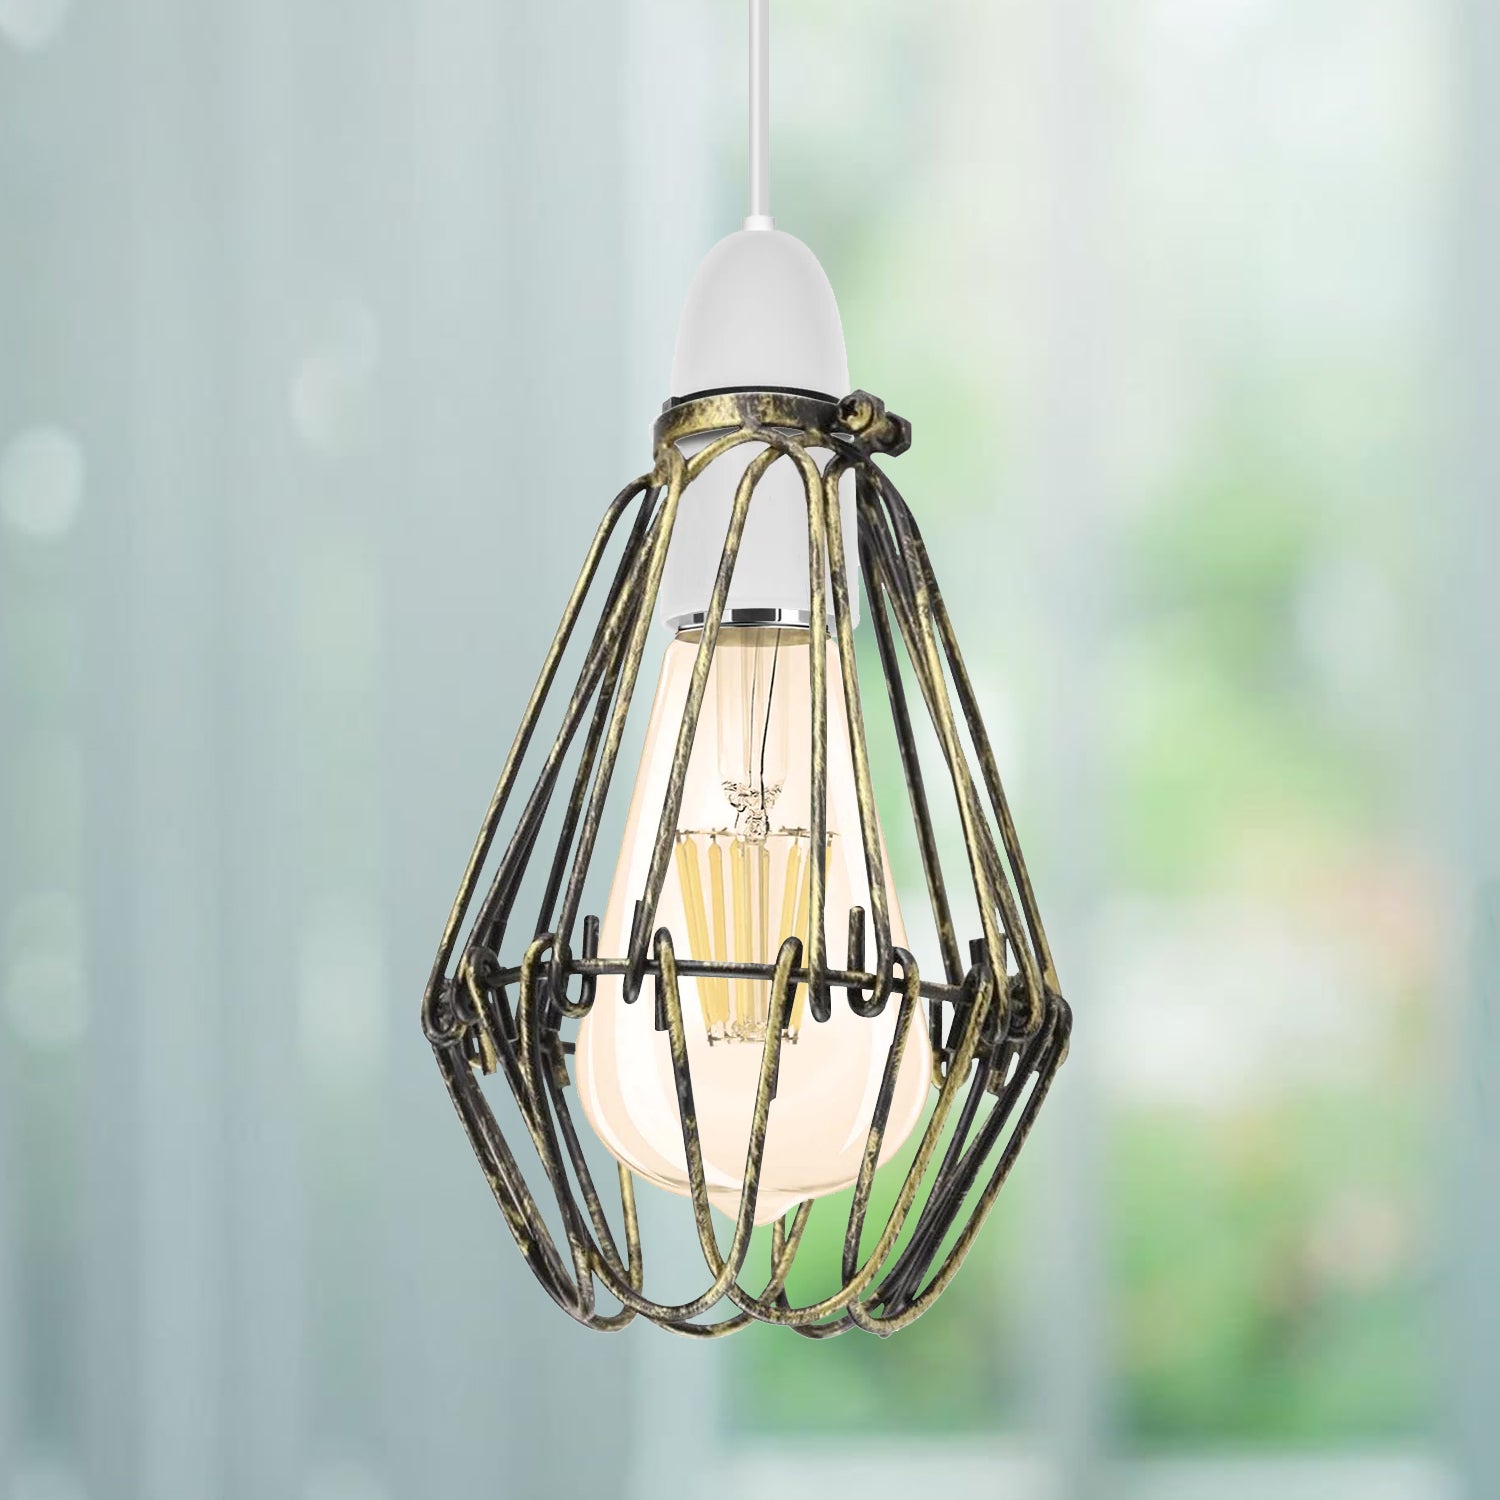 Industrial Water Lily Iron Wire Cage Lamp Lighting Decoration Shade~2909